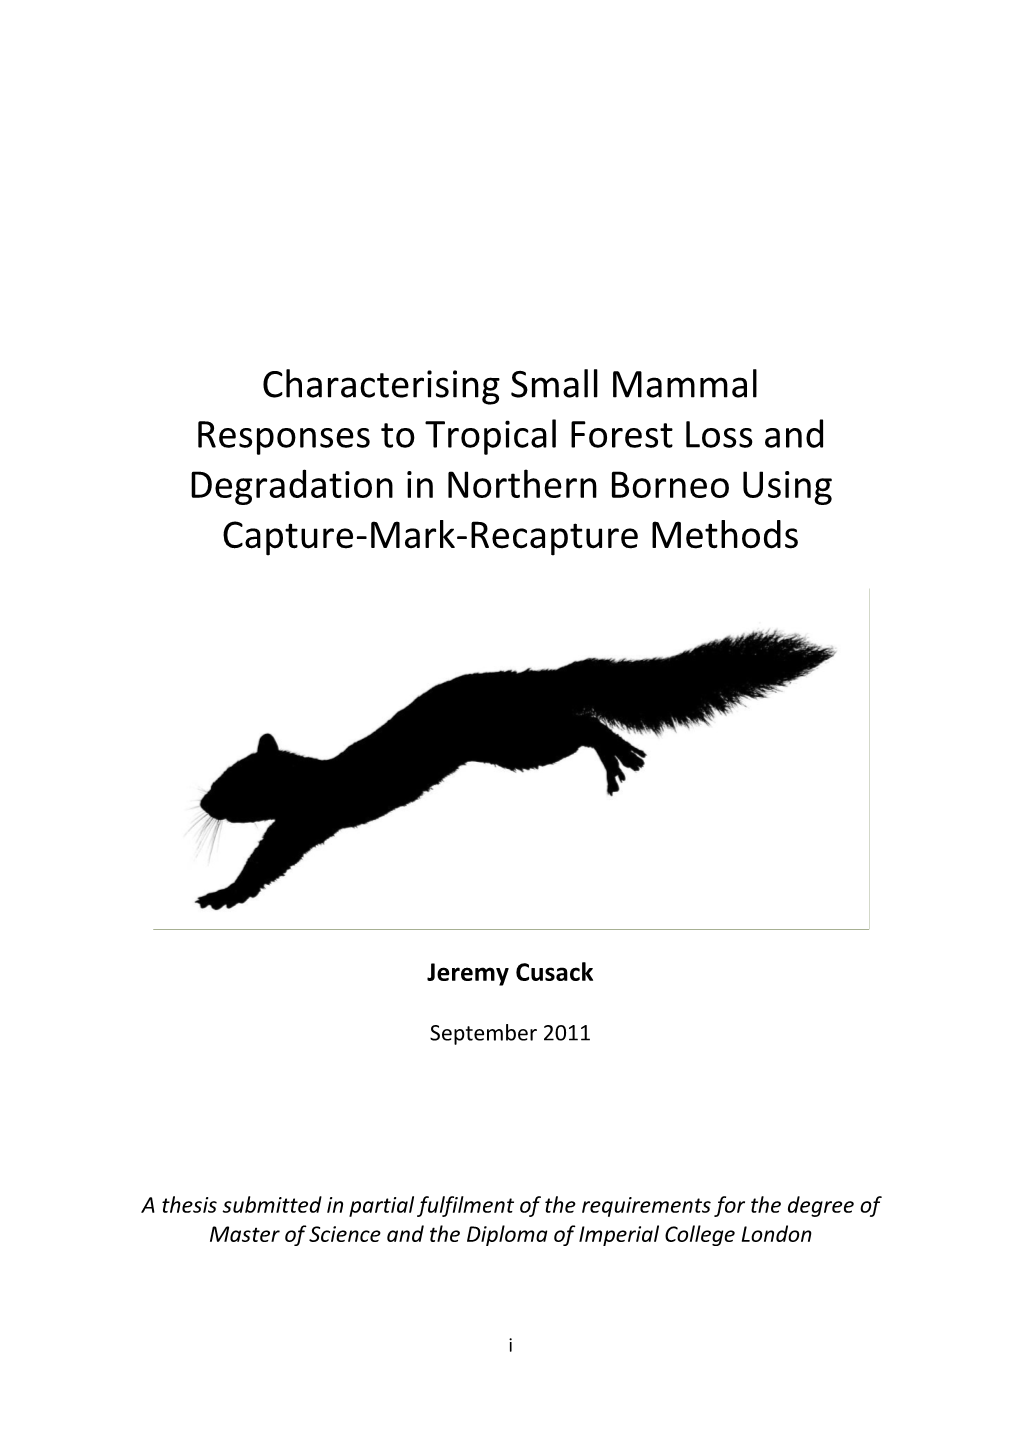 Characterising Small Mammal Responses to Tropical Forest Loss and Degradation in Northern Borneo Using Capture-Mark-Recapture Methods